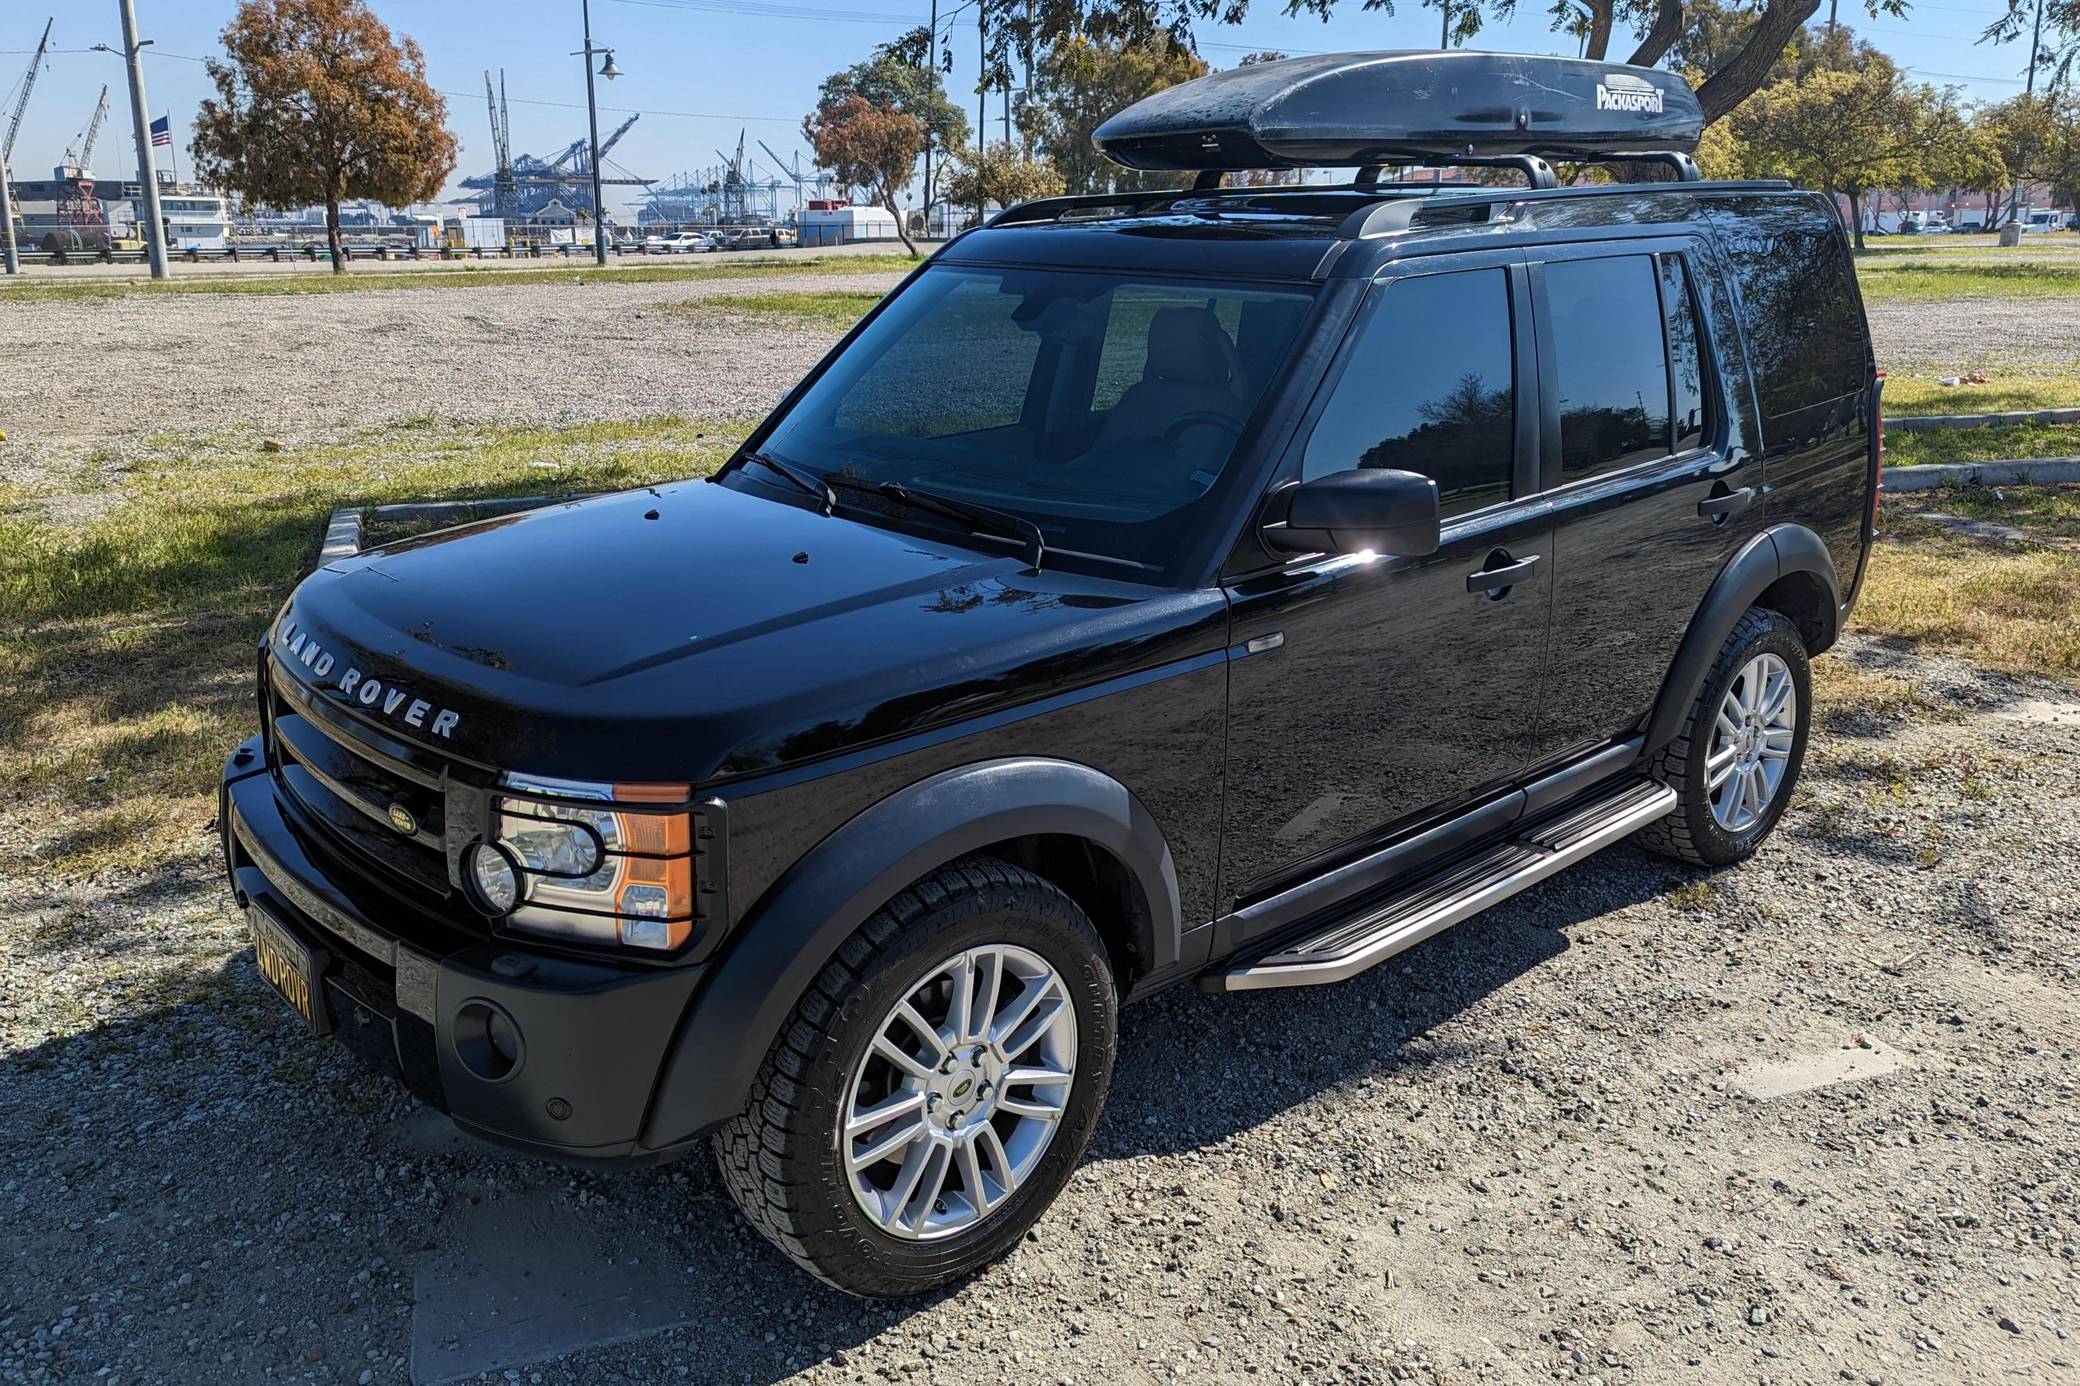 Overland Classifieds :: 2006 Land Rover Discovery LR3 - Expedition Portal